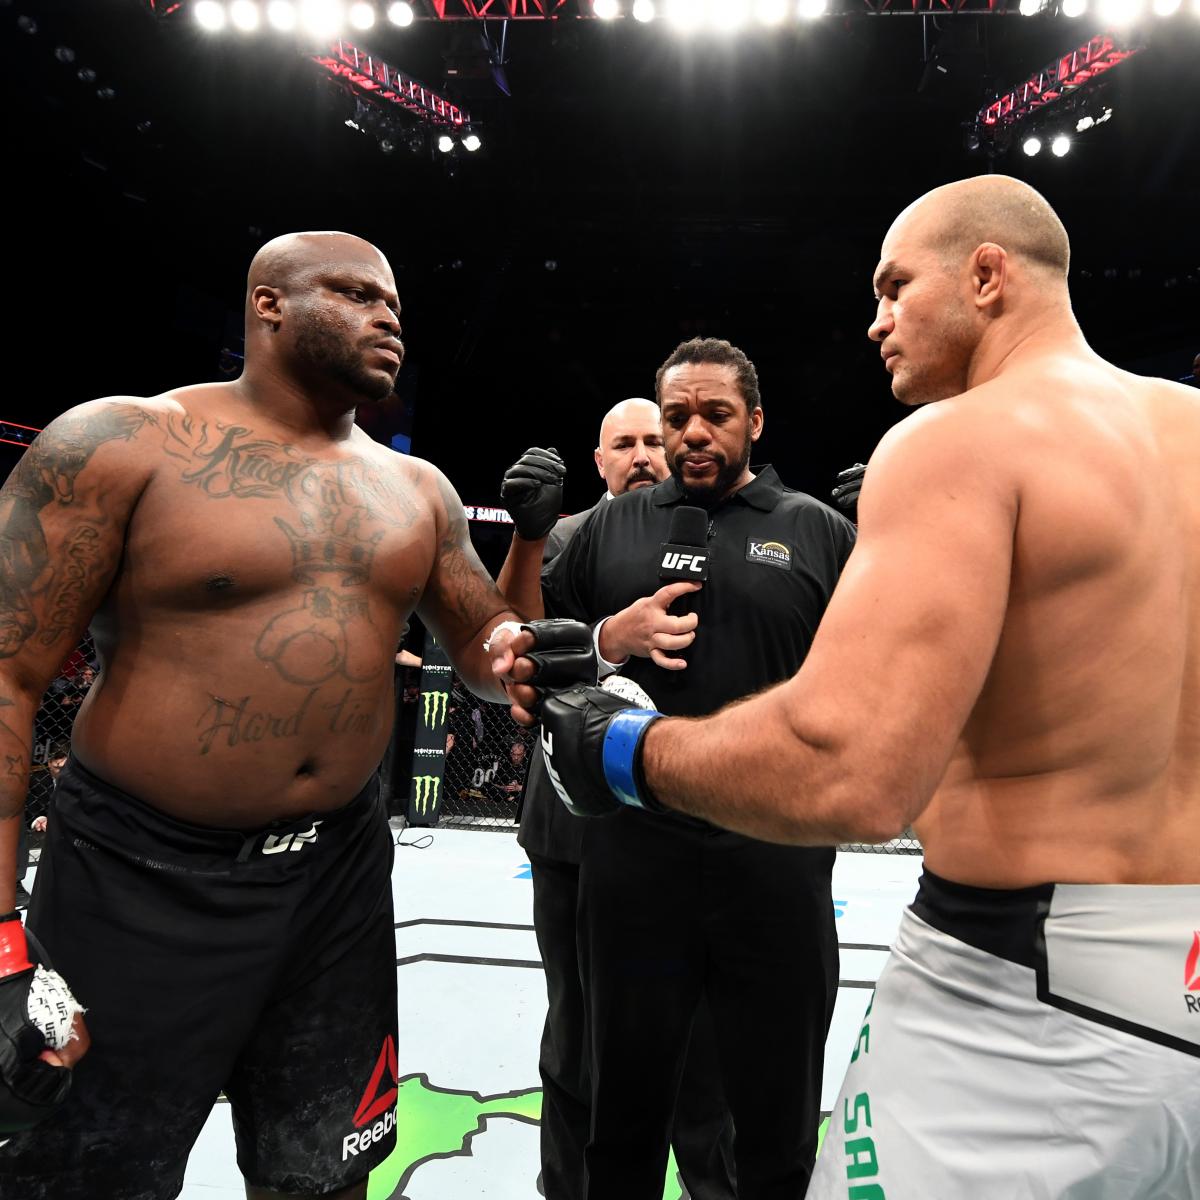 UFC Fight Night 146 Results The Real Winners and Losers News, Scores